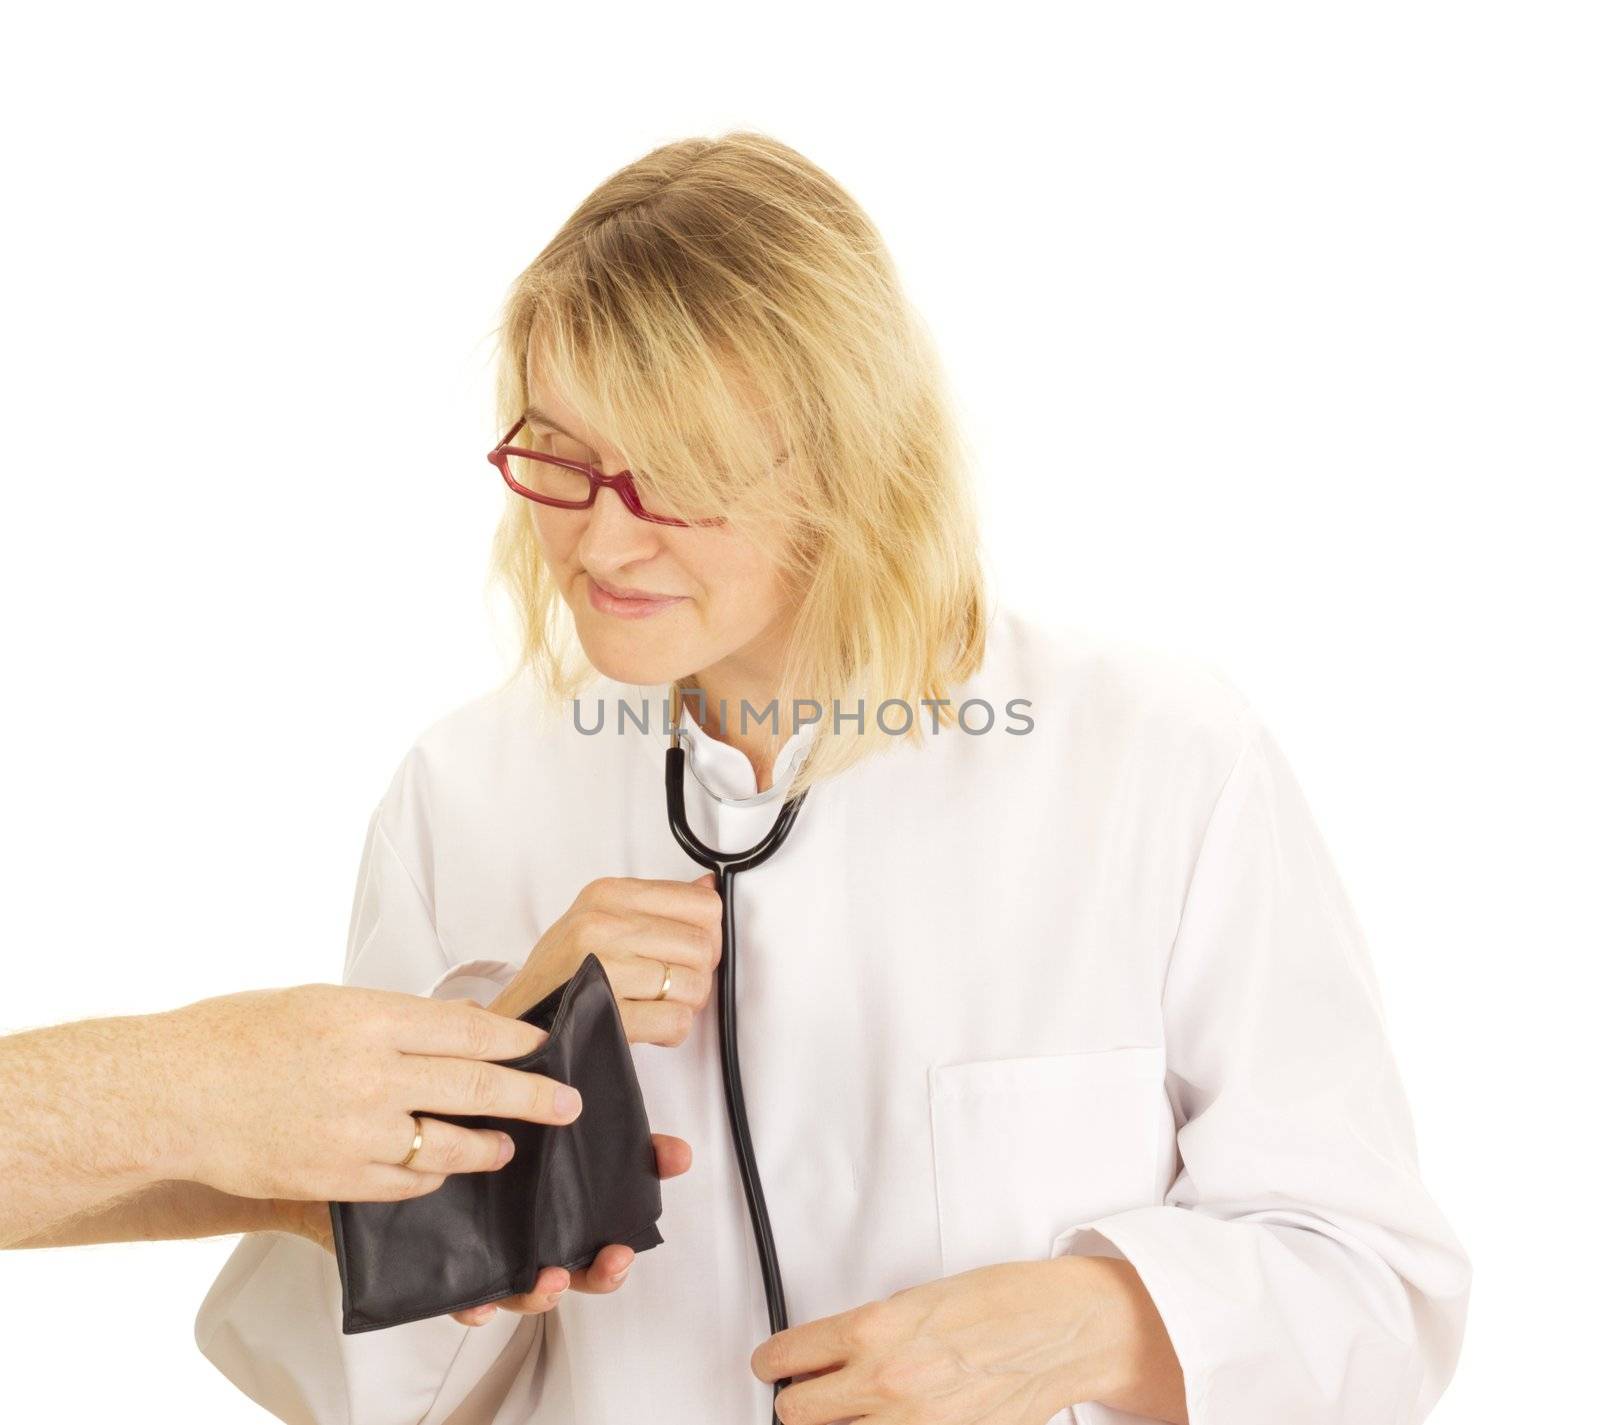 A medical doctor accepts funds